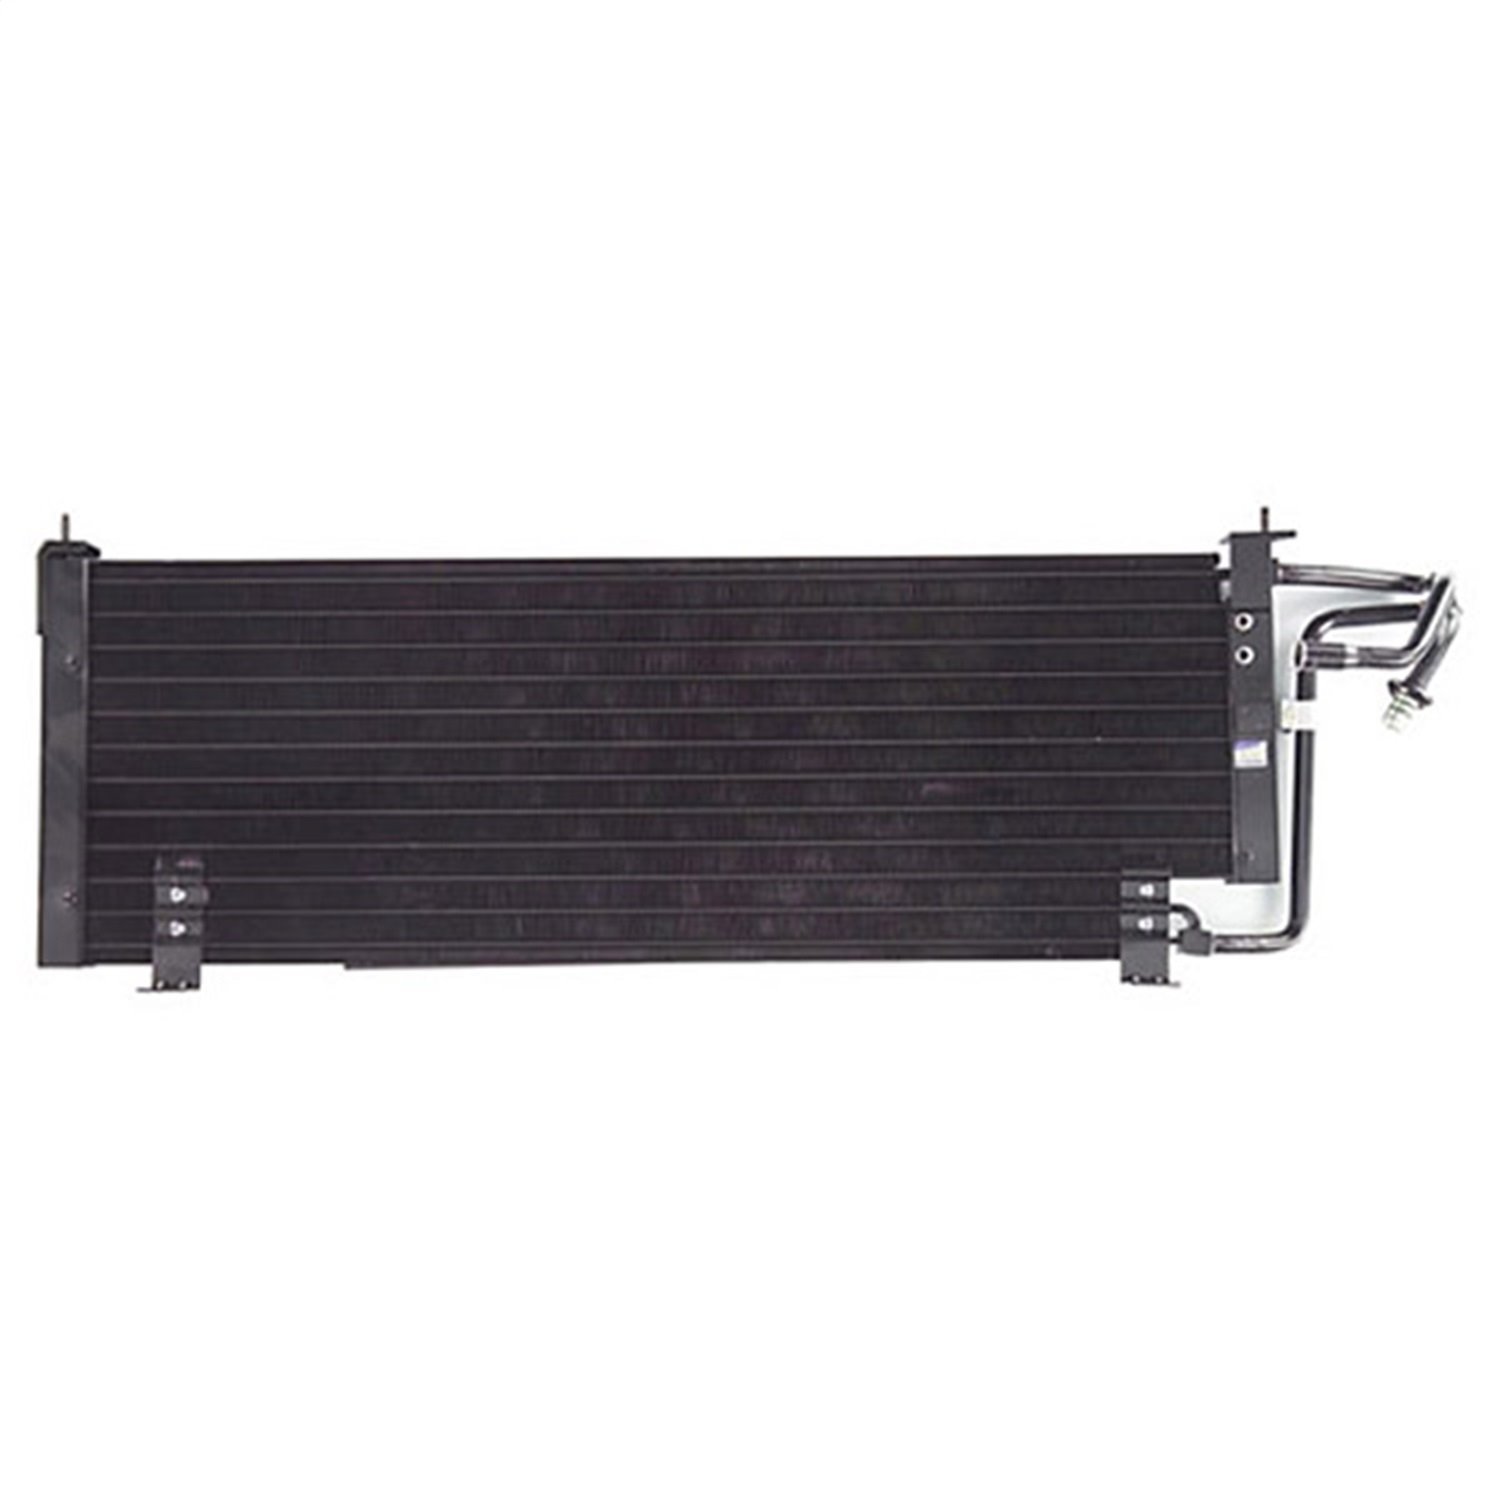 This ac condenser from Omix-ADA fits 97-01 Jeep Cherokee XJ